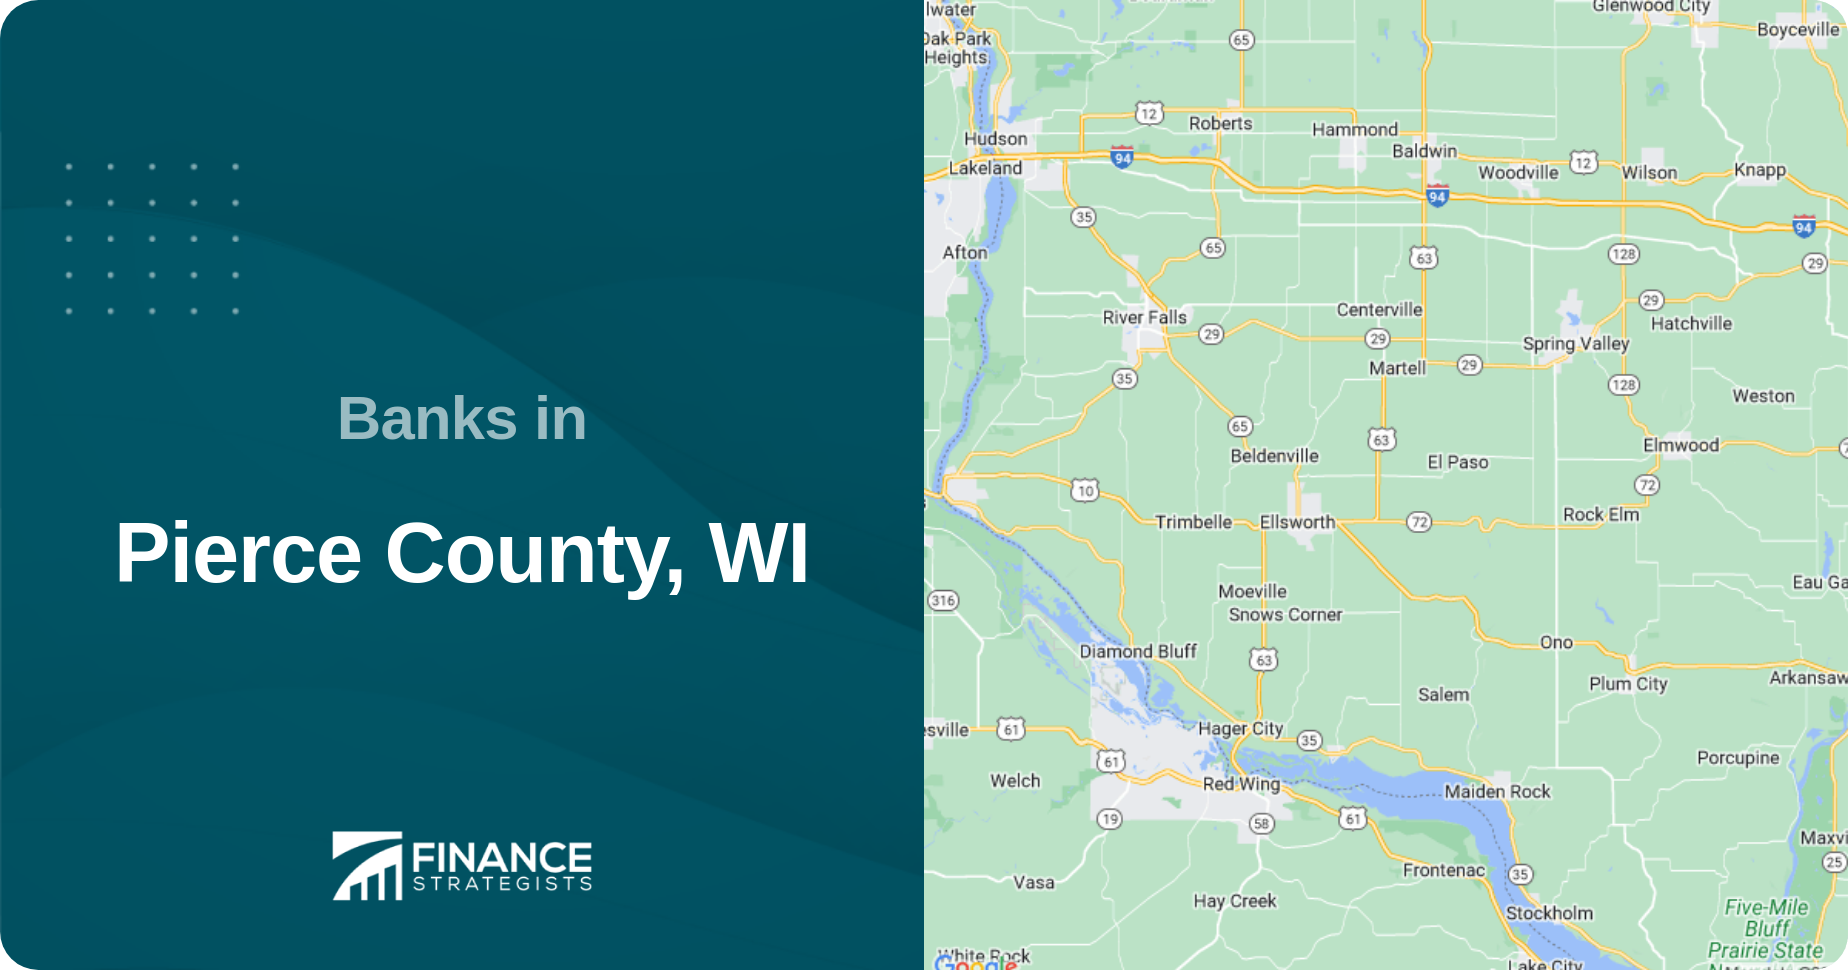 Banks in Pierce County, WI